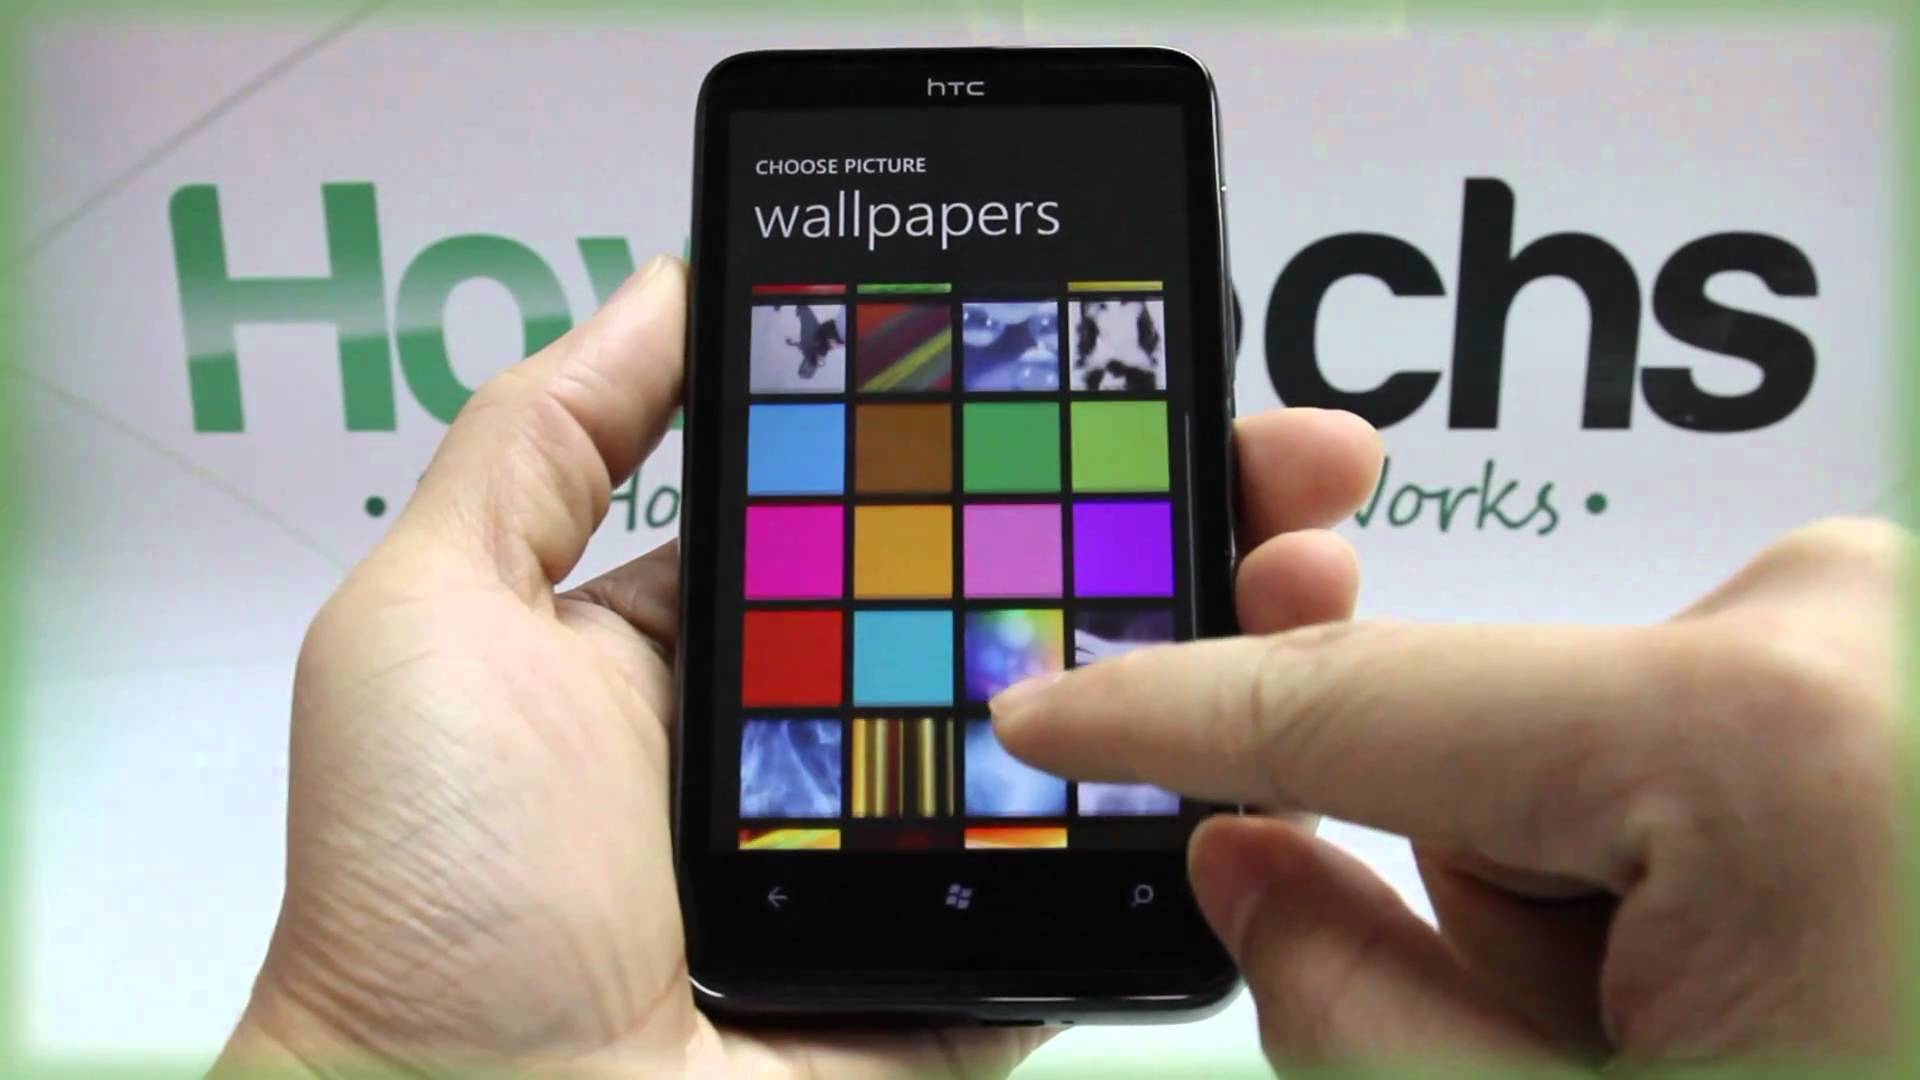 How To Change The Wallpaper On Htc HD7